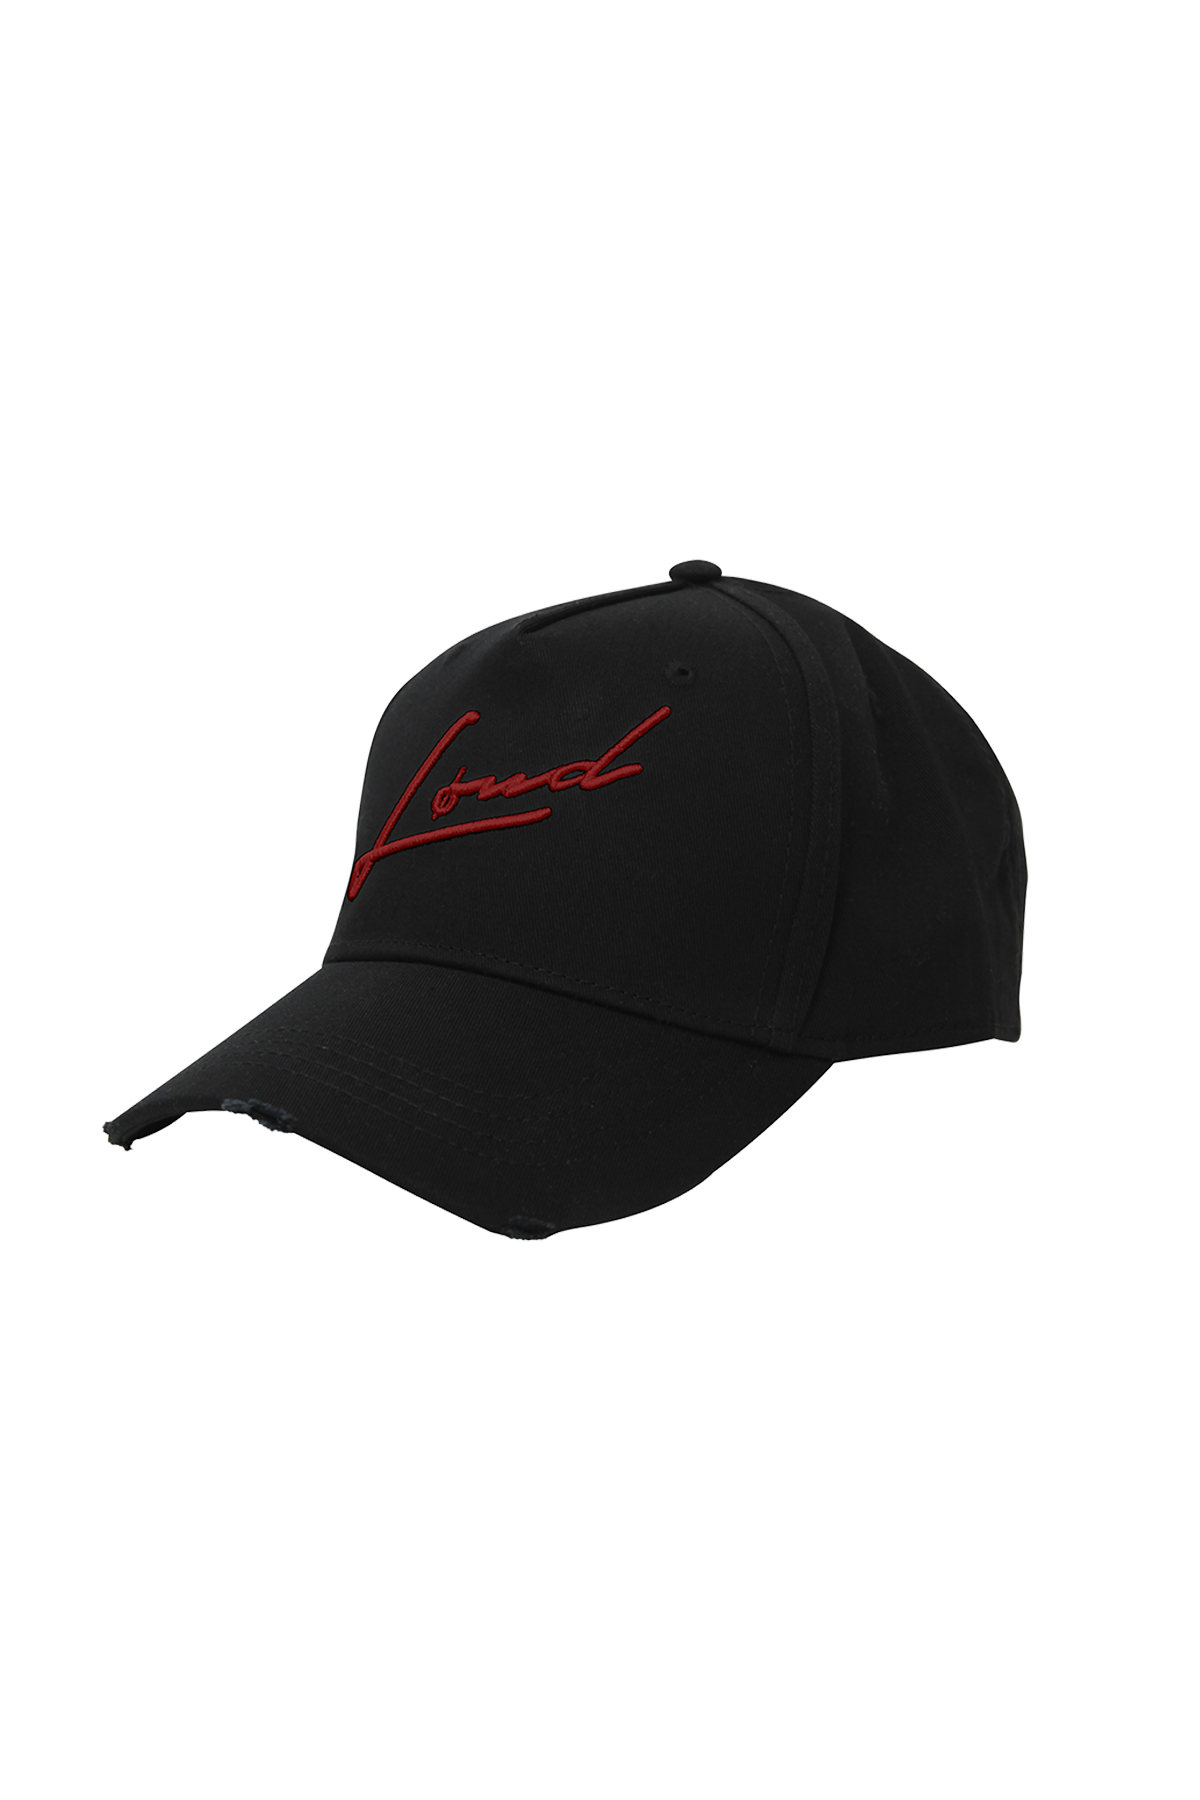 Loud Black and Red Distressed Signature Cap - Live Look Loud